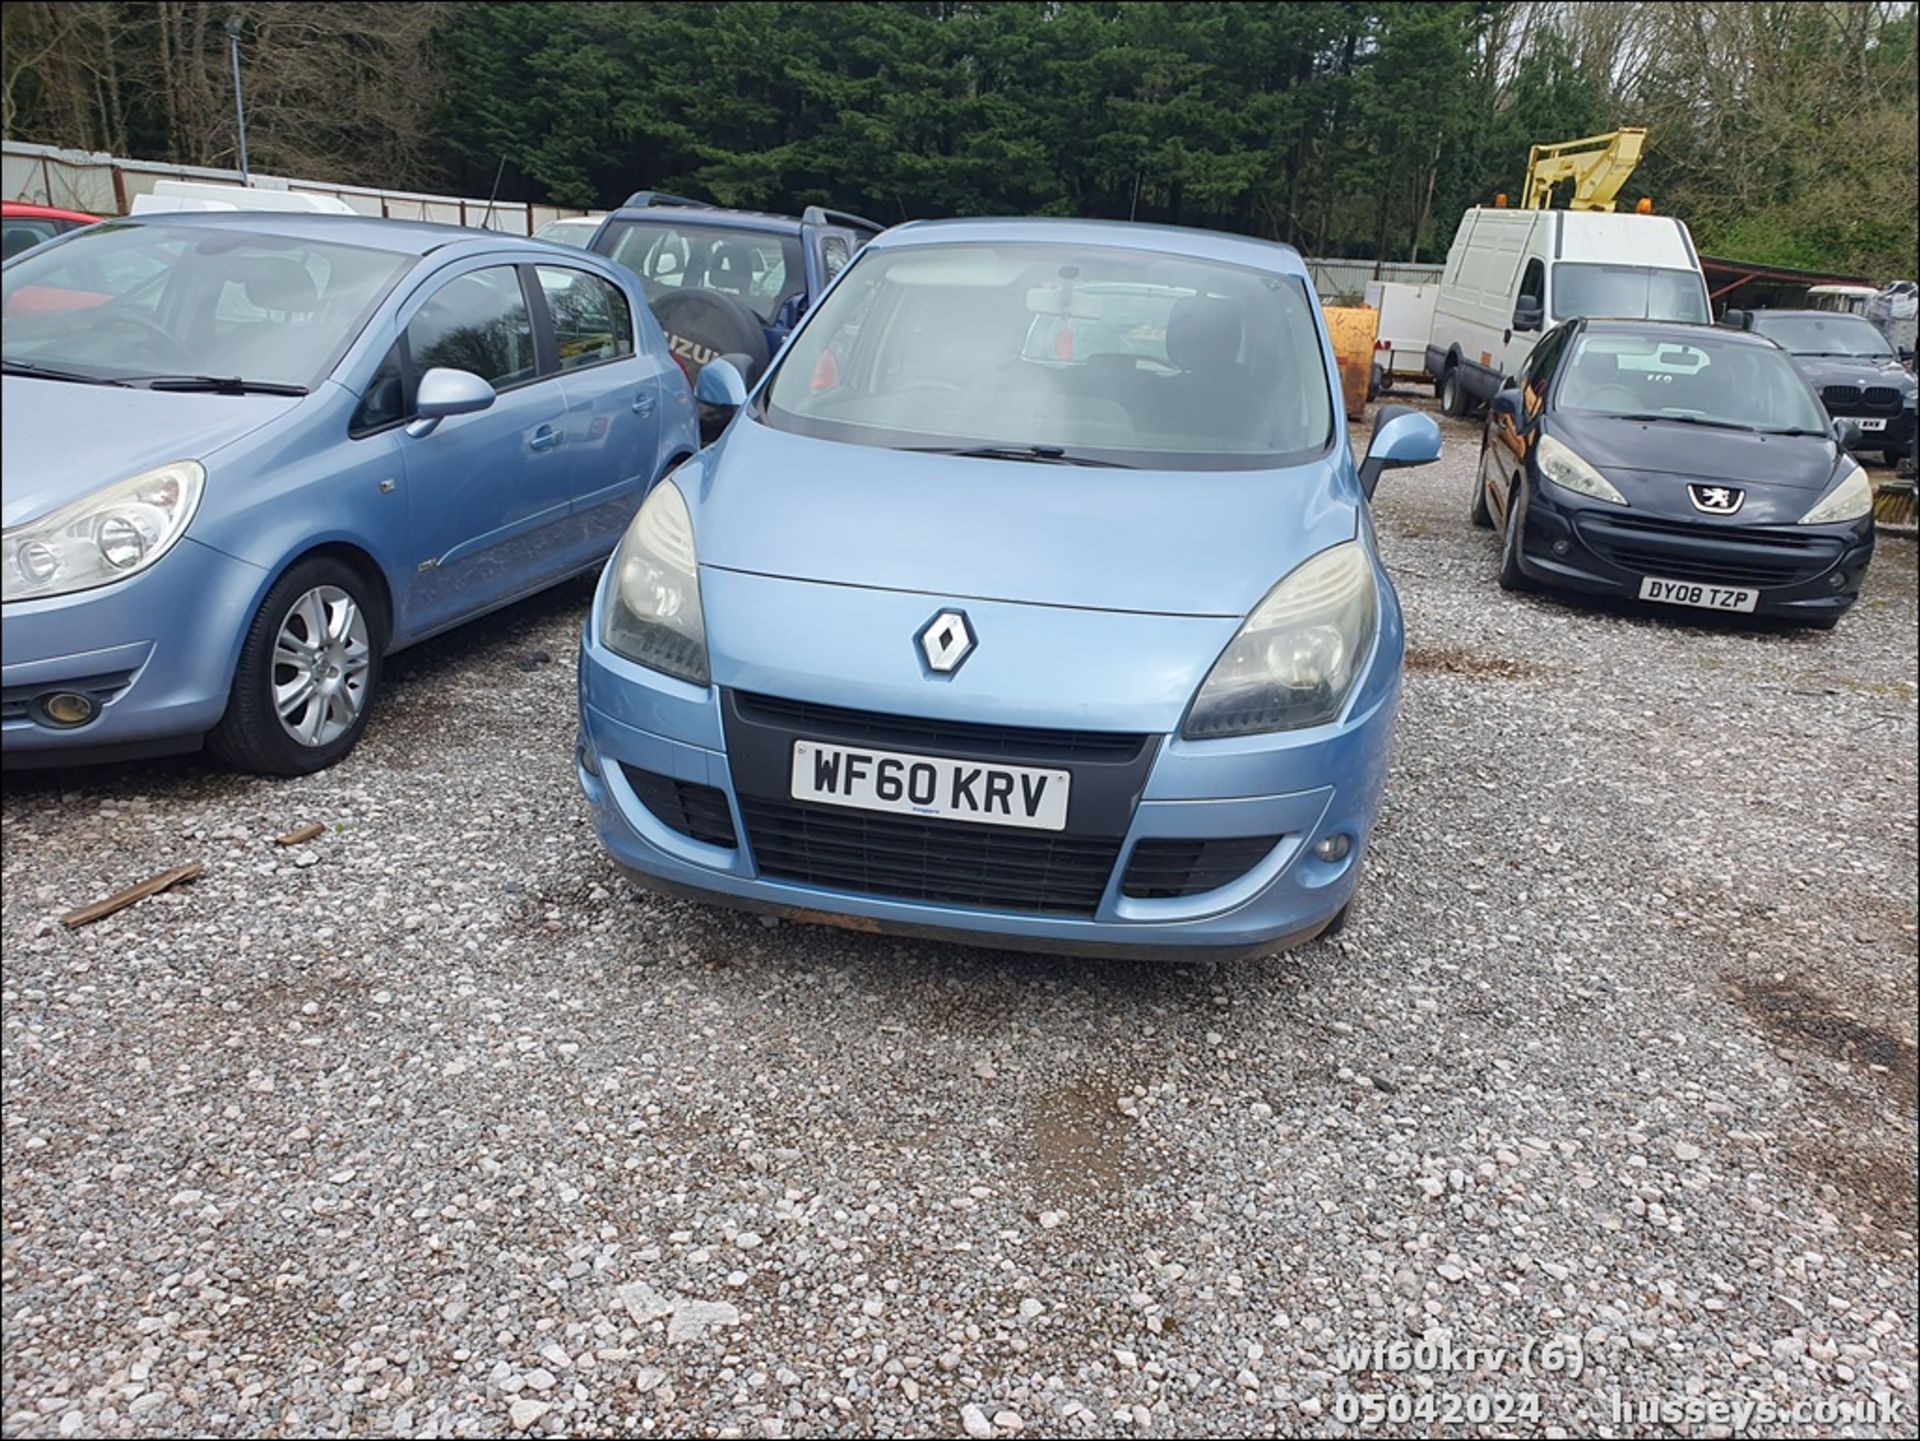 10/60 RENAULT SCENIC EXPRESSION DCI 105 - 1461cc 5dr MPV (Blue) - Image 7 of 50